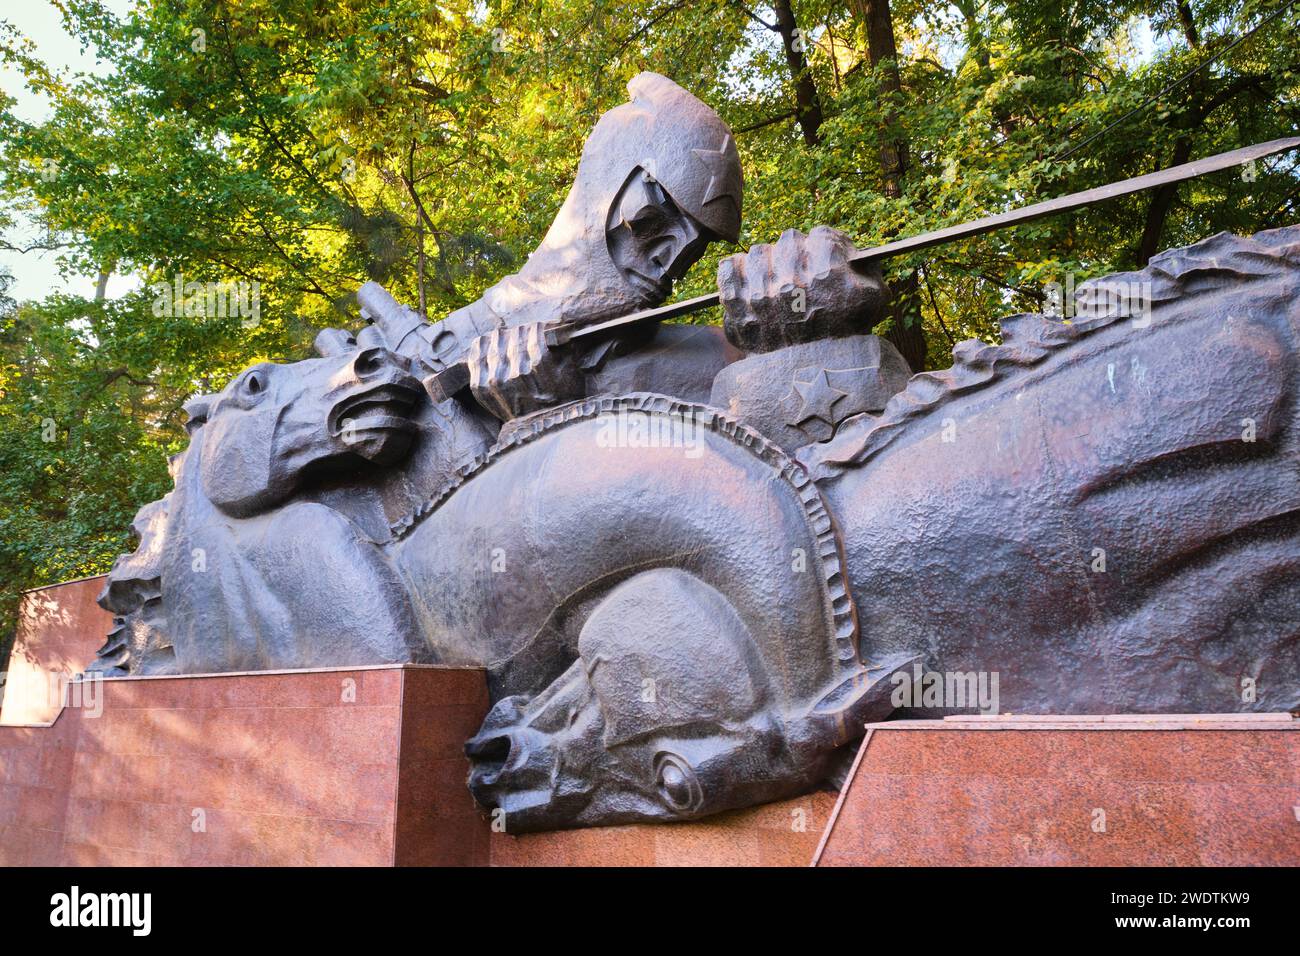 At the left, the part of the memorial with an 'Oath' theme, a soldier leading horses. At the Memorial of Glory in Panfilov park in Almaty, Kazakhstan. Stock Photo